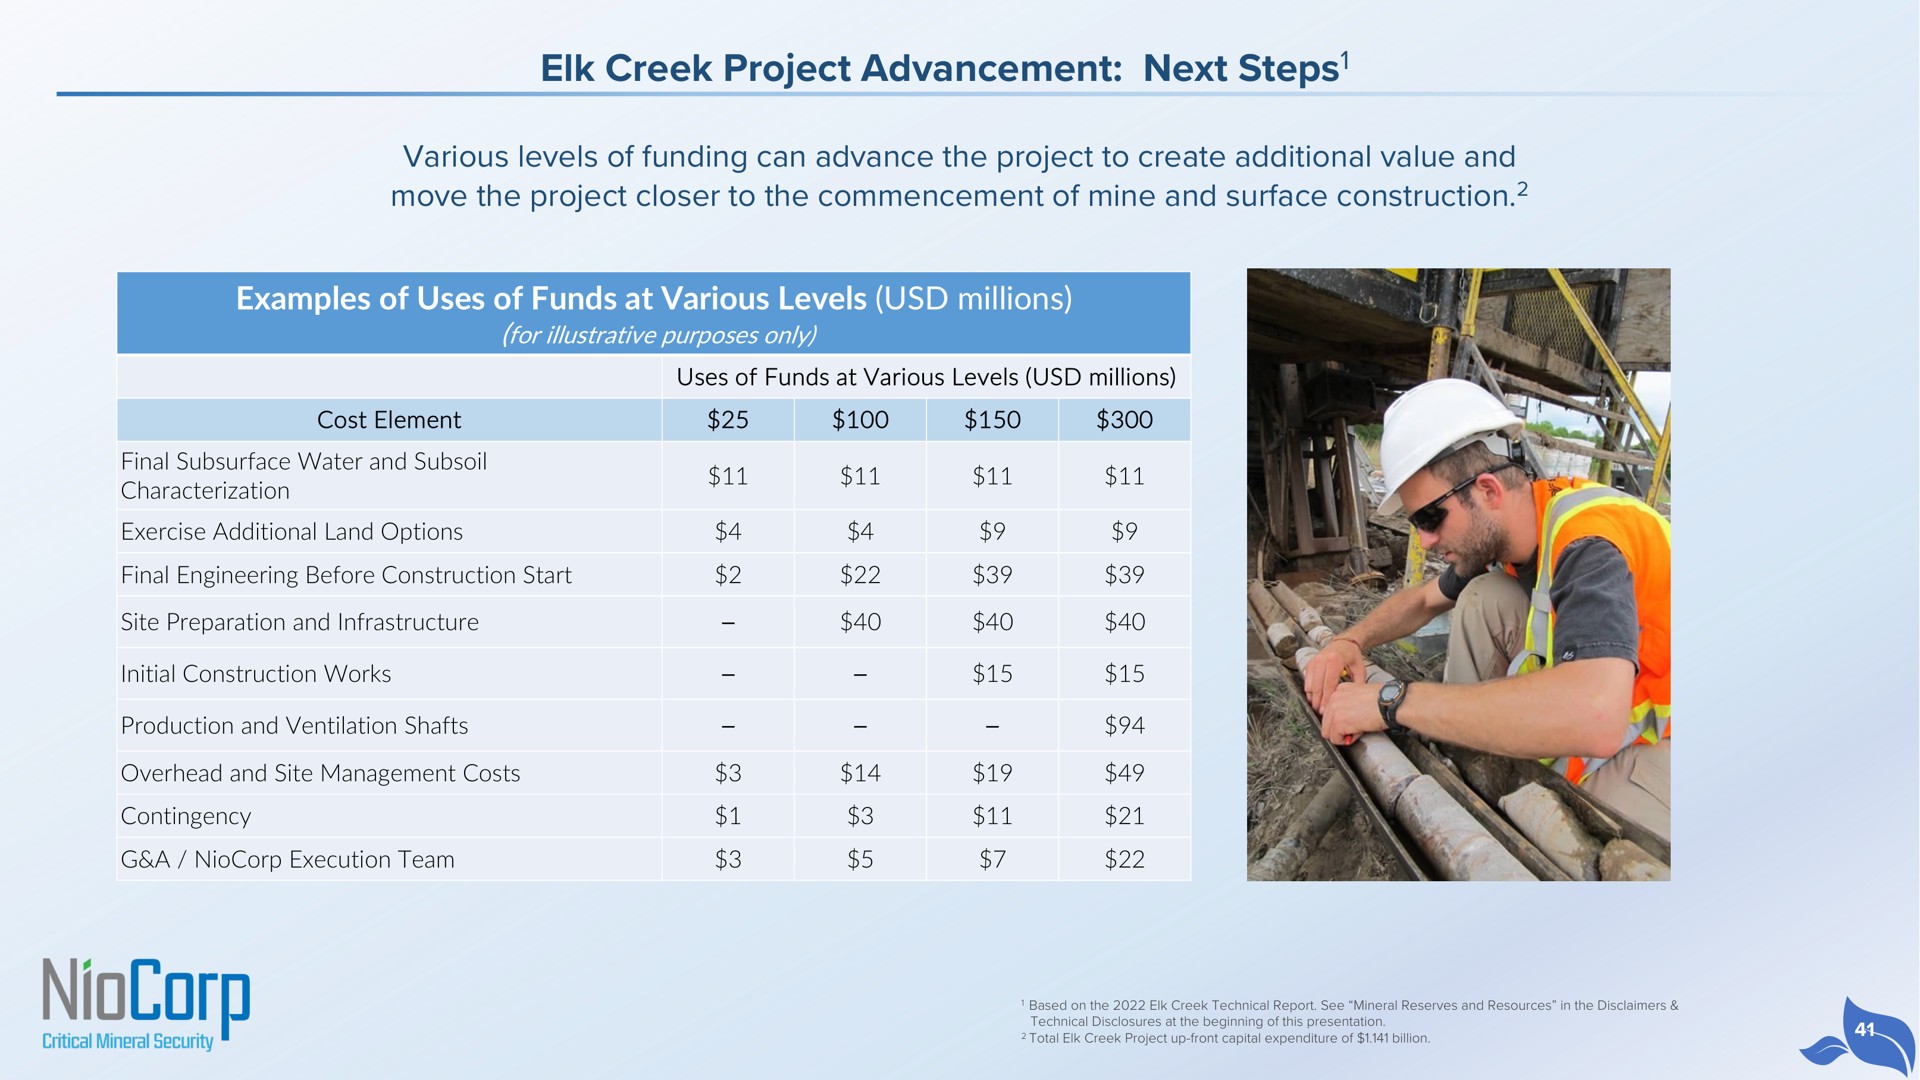 elk creek project advancement next steps various levels of funding can advance the project to create additional value and move the project closer to the commencement of mine and surface construction examples of uses of funds at various levels millions steps cost element eats skit | NioCorp